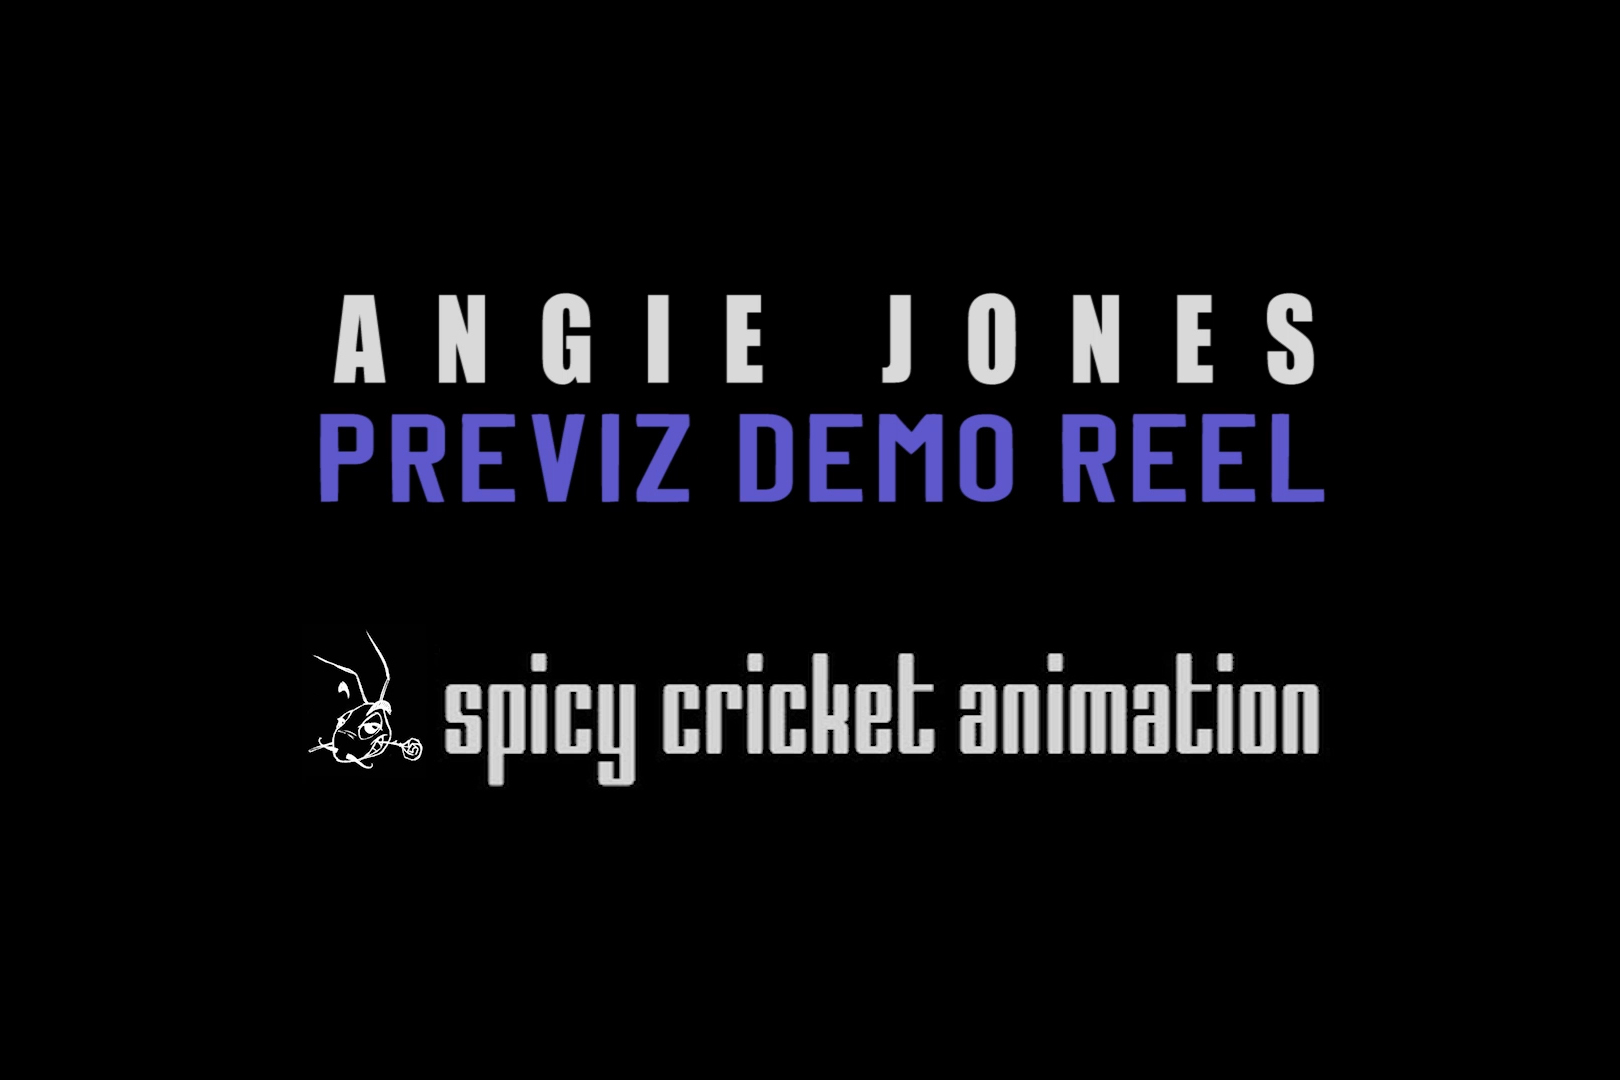 Previz Reel - Angie Jones email me for the password: angie @ spicycricket dot com